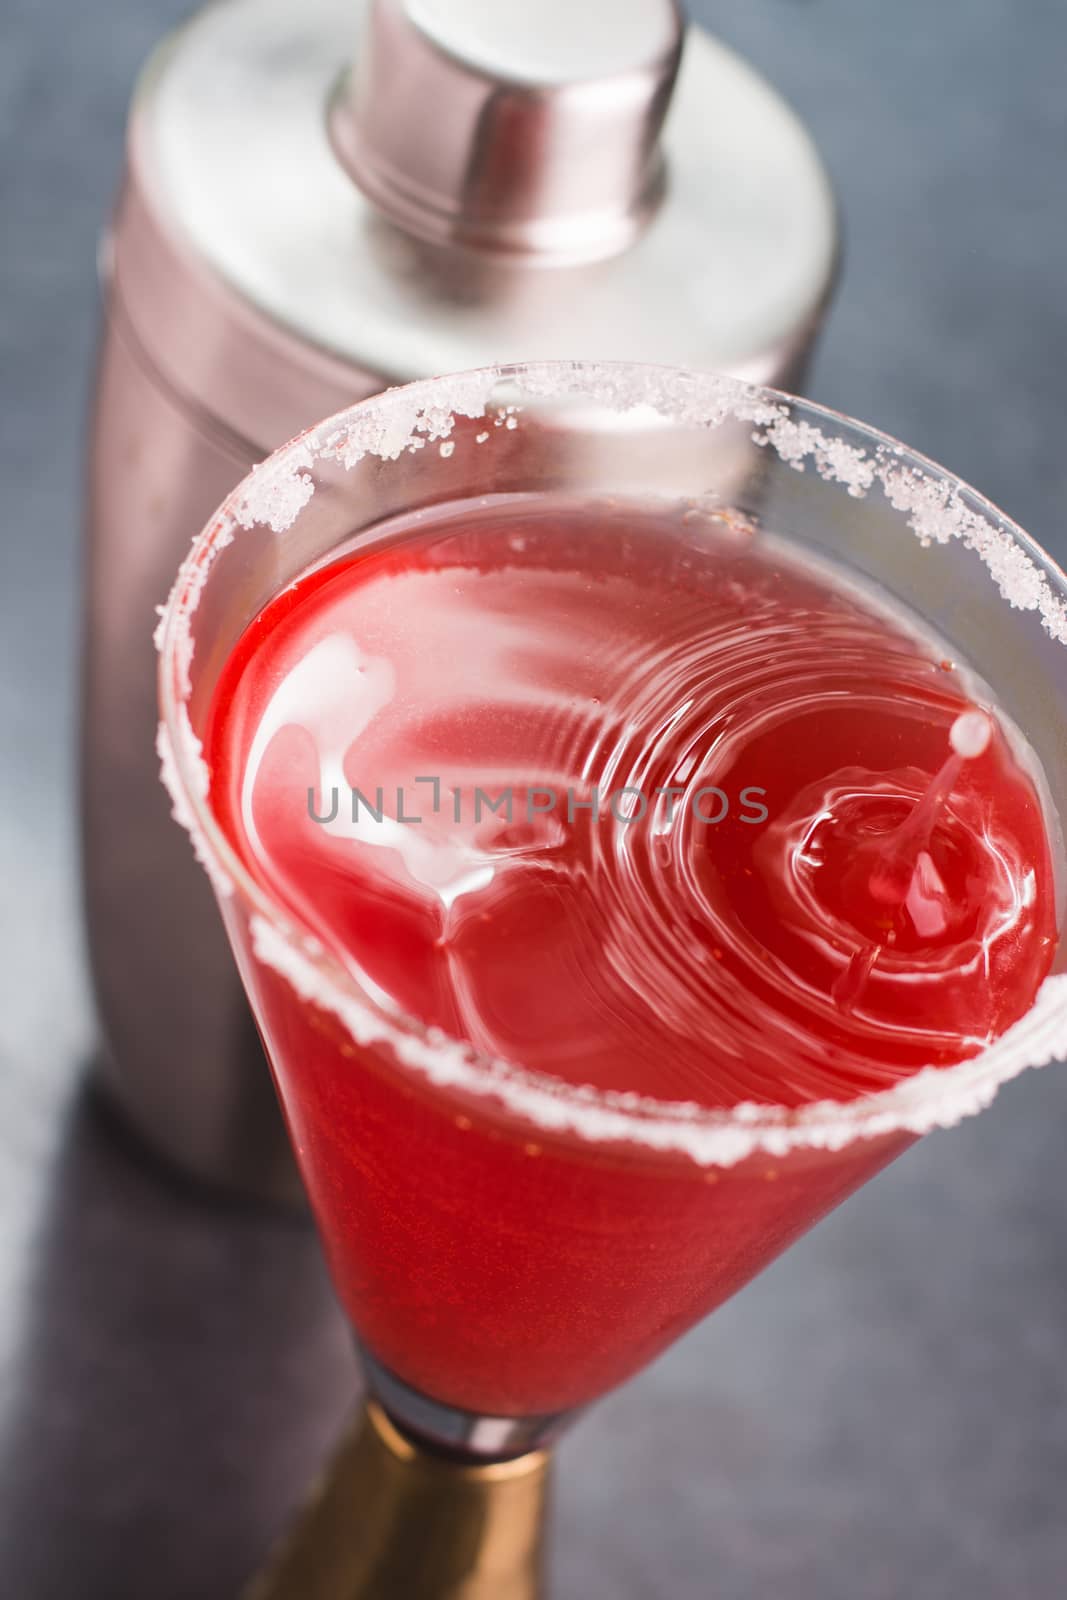 strawberry cocktail drink with droplet and shaker in the background